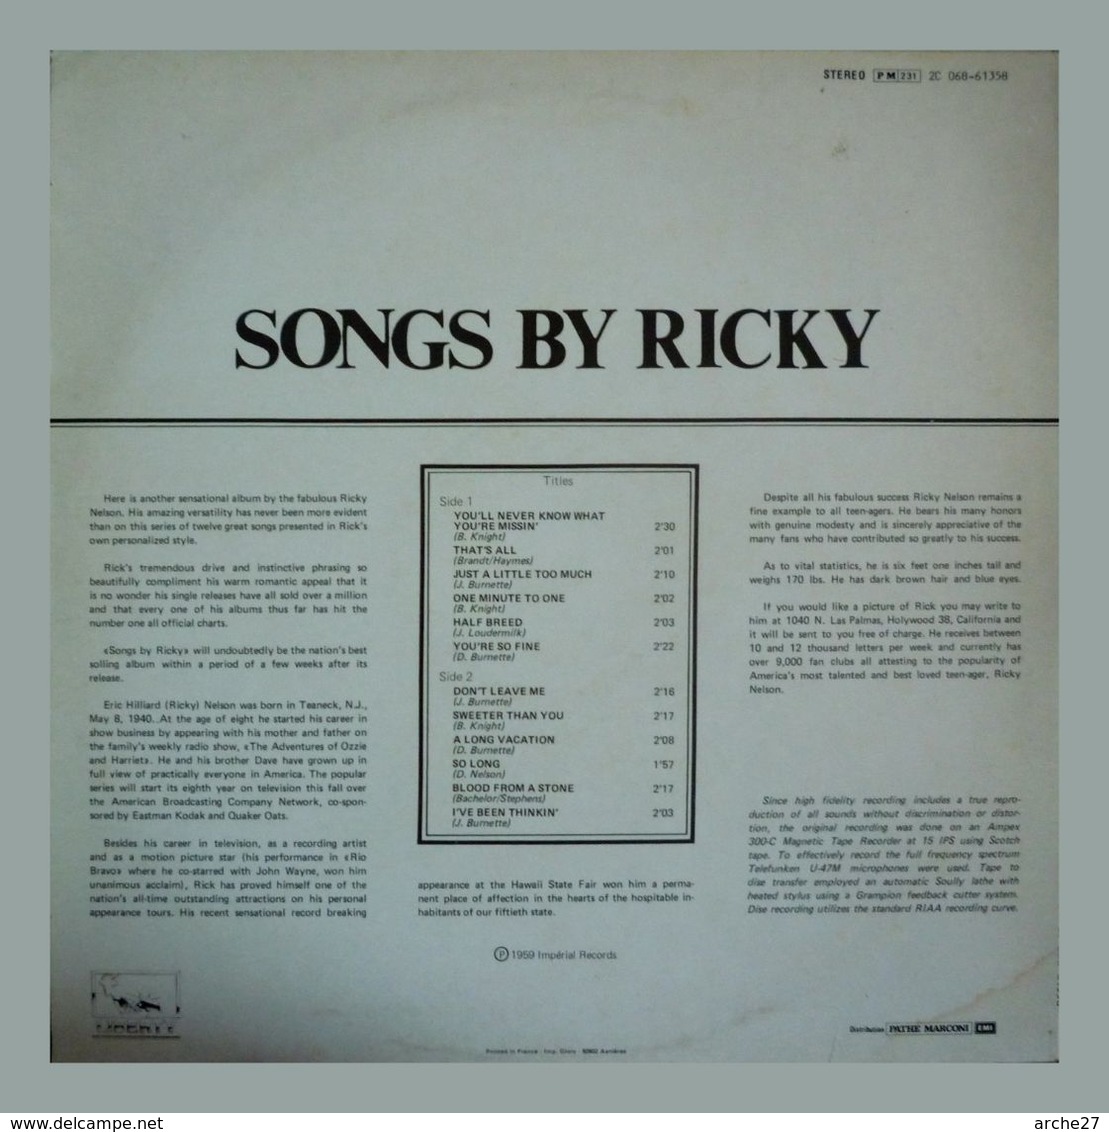 RICKY NELSON - LP - 33T - Disque Vinyle - Songs By Ricky - 61358 - Rock